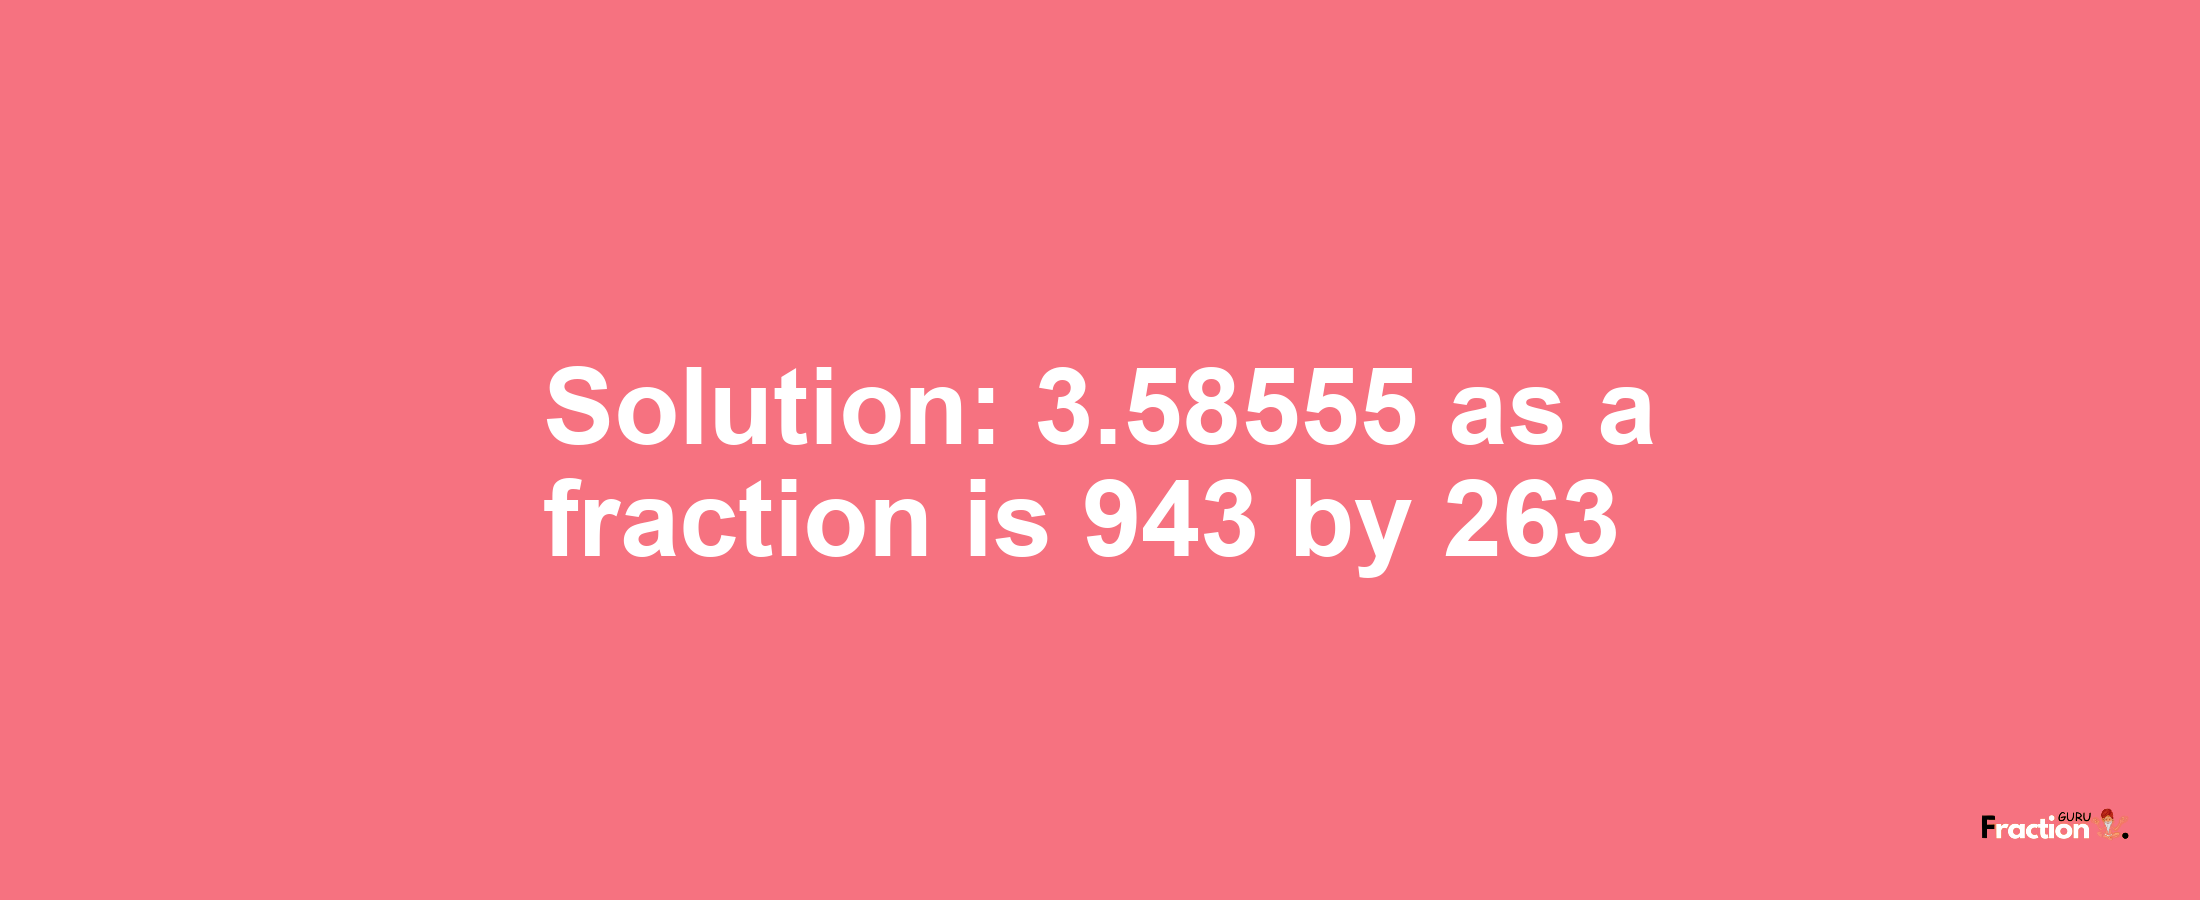 Solution:3.58555 as a fraction is 943/263